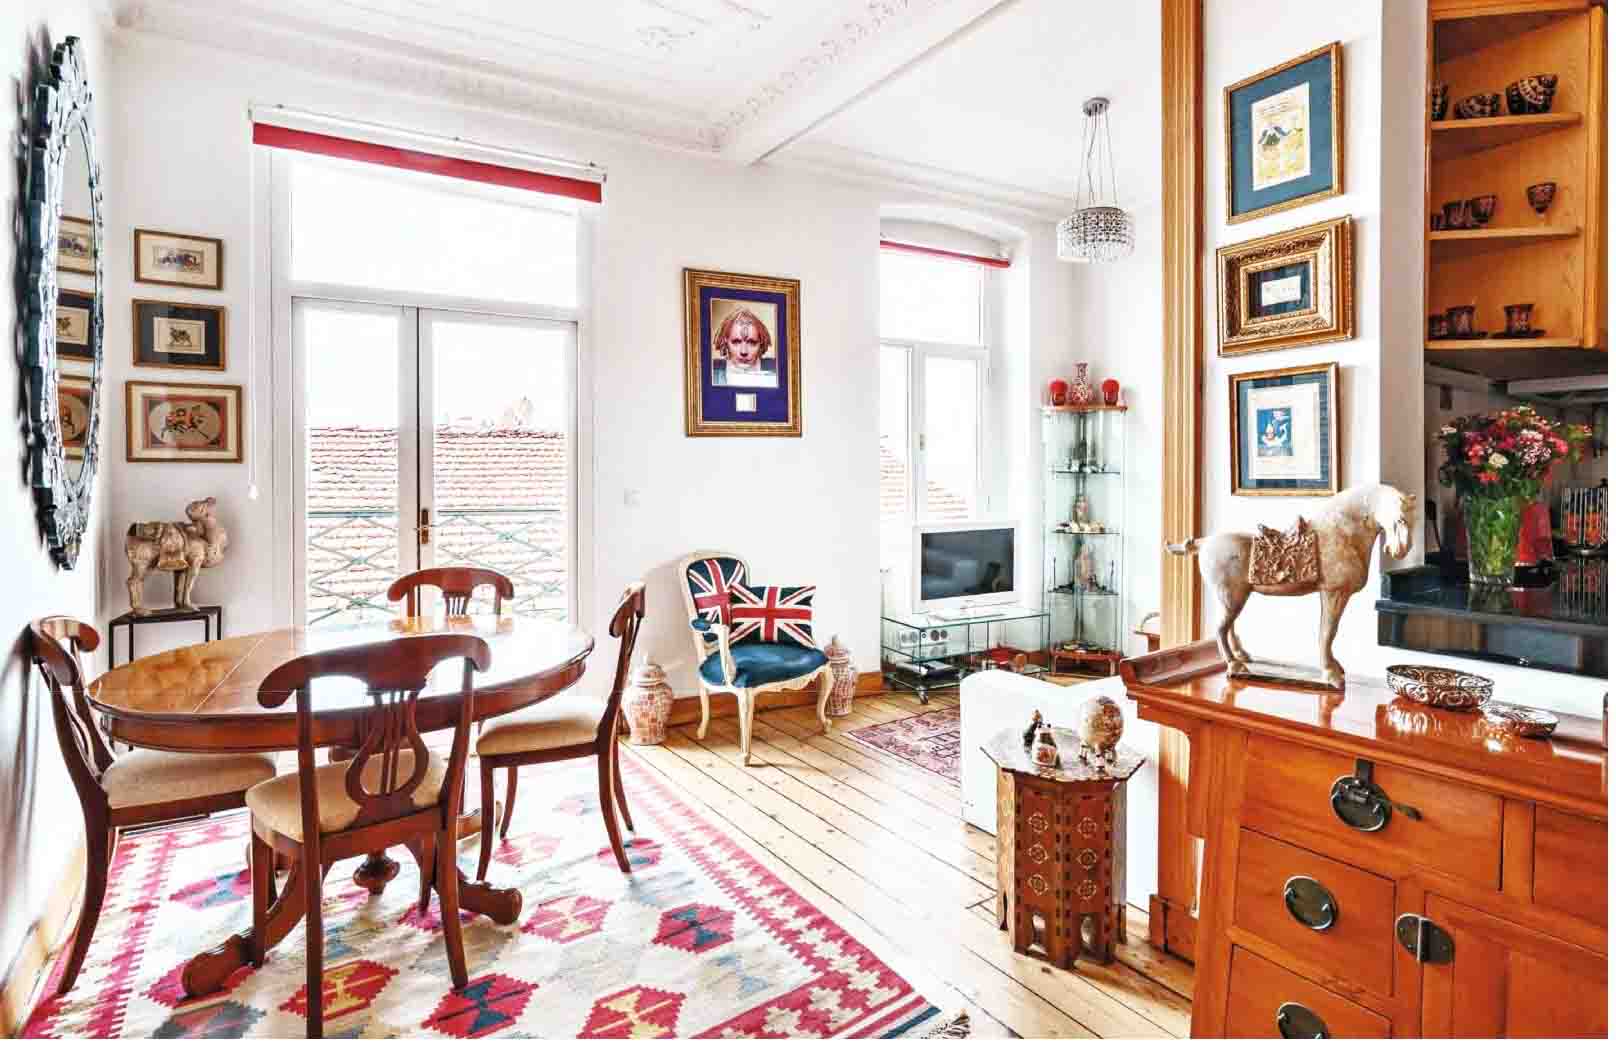 3 bed istanbul apartment for sale beyoglu central high ceilings